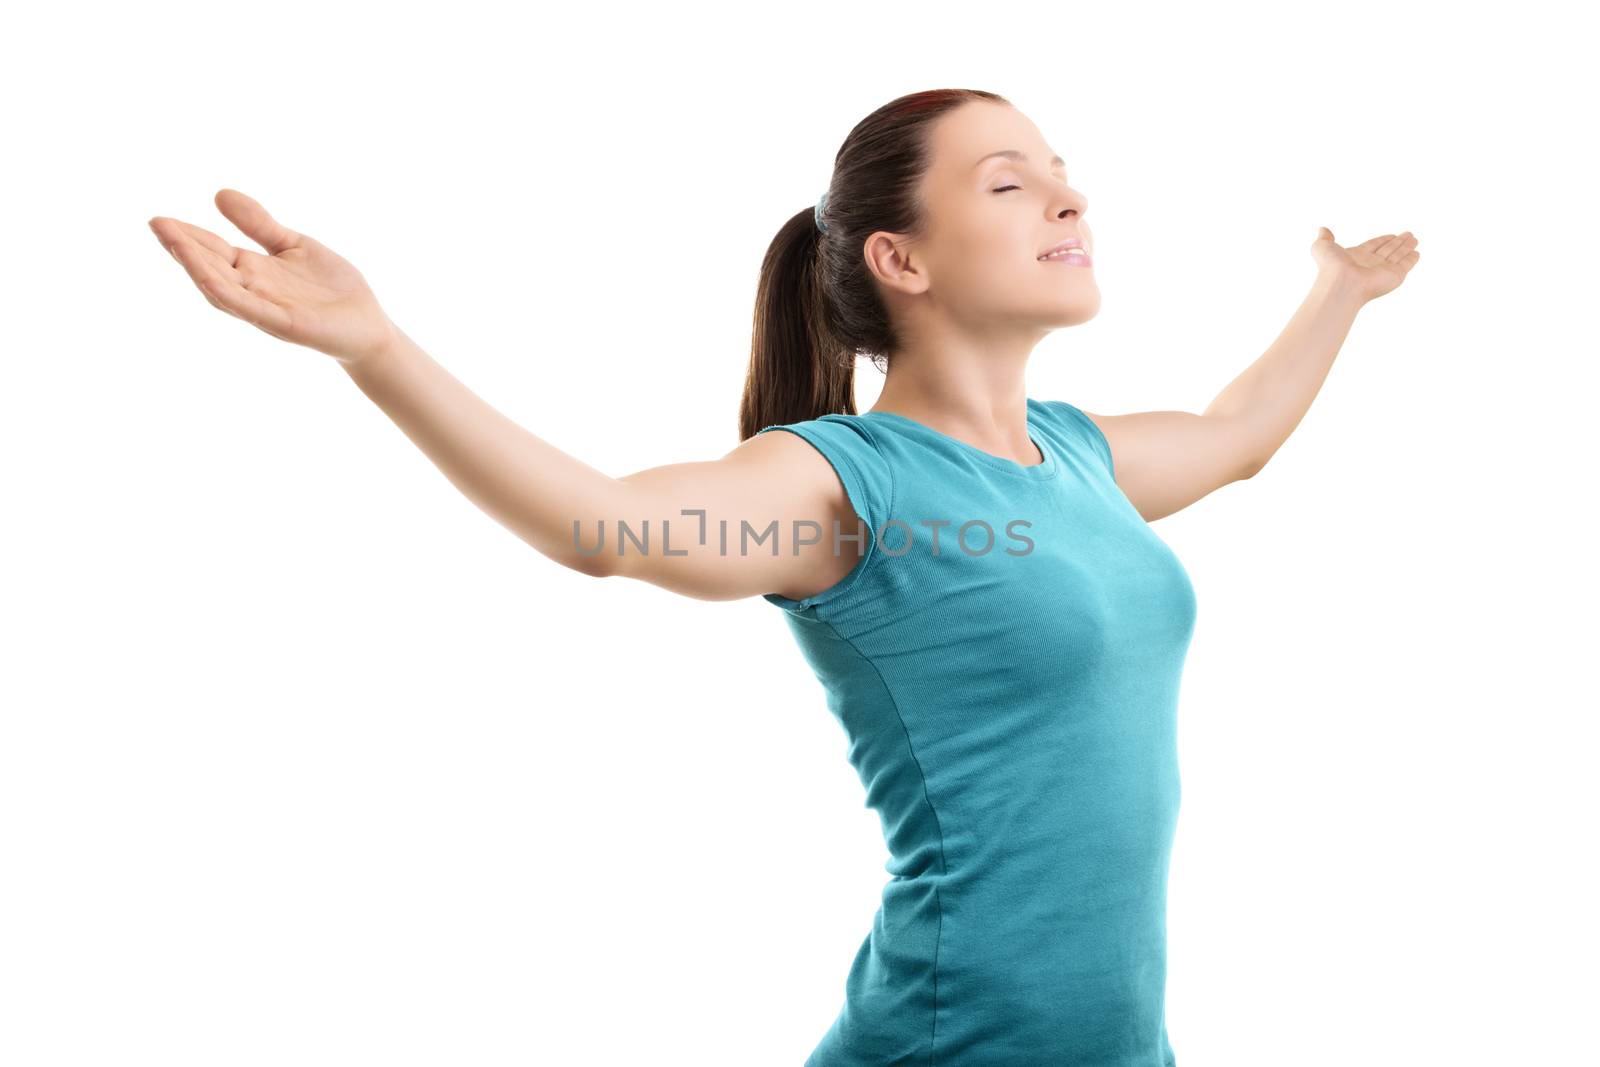 Beautiful young girl with outstretched arms, feeling calm, smiling and looking upward, isolated on white background.